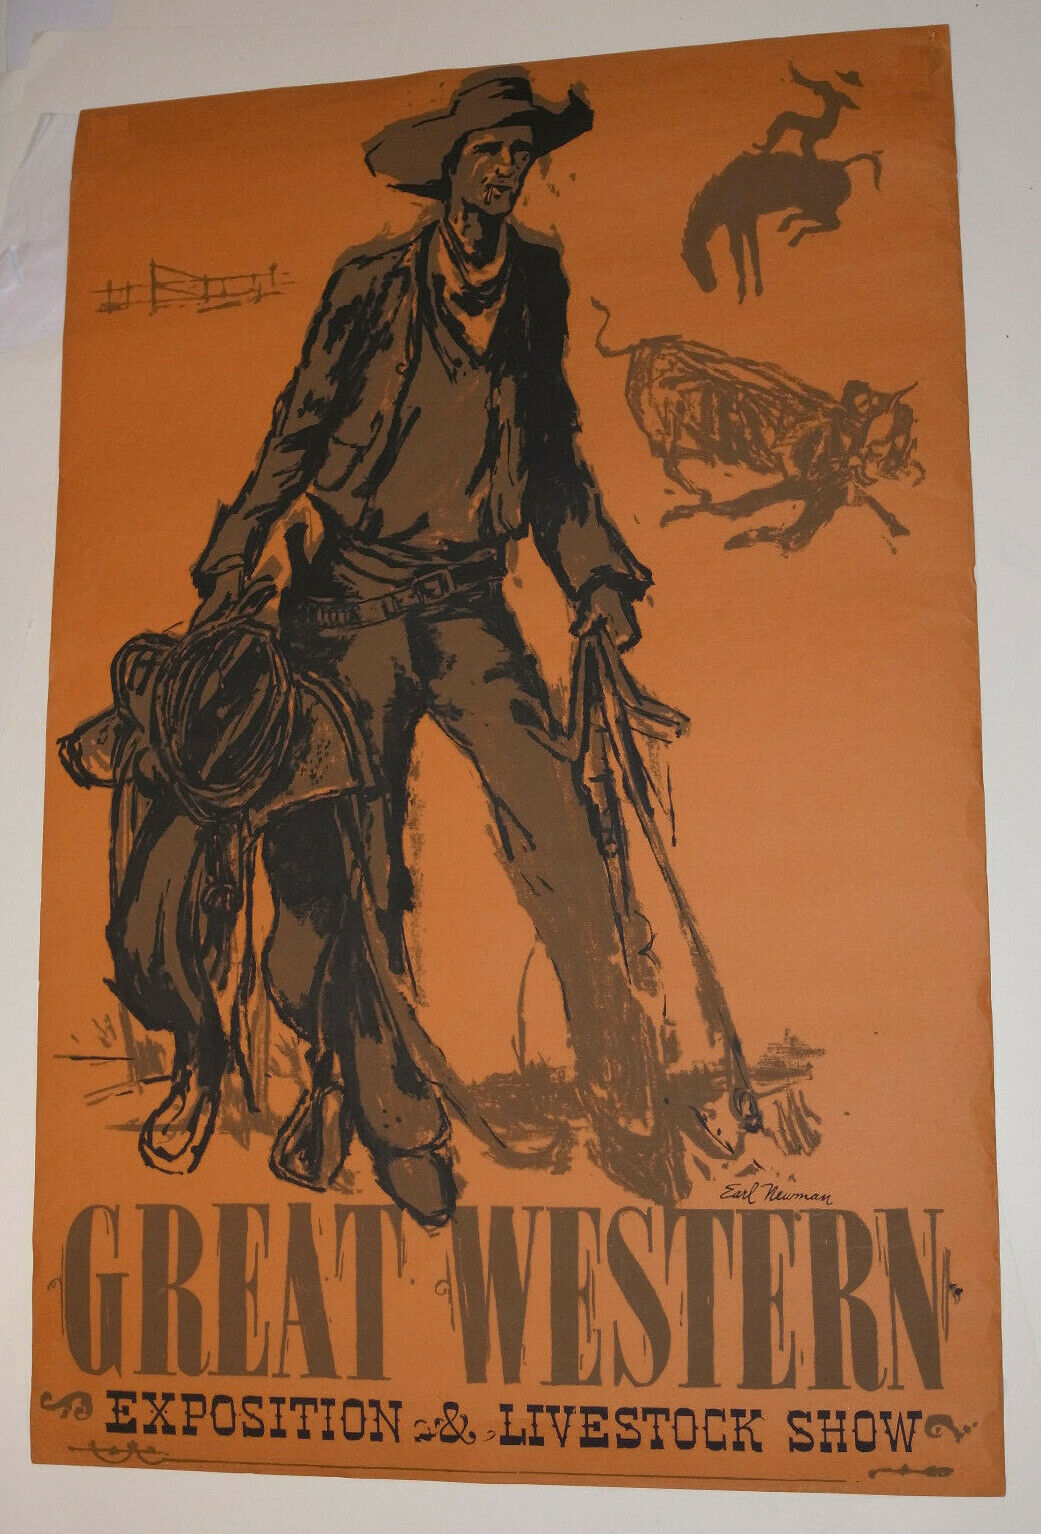 VINTAGE EARL NEWMAN POSTER GREAT WESTERN LIVESTOCK & EXPOSITION SHOW